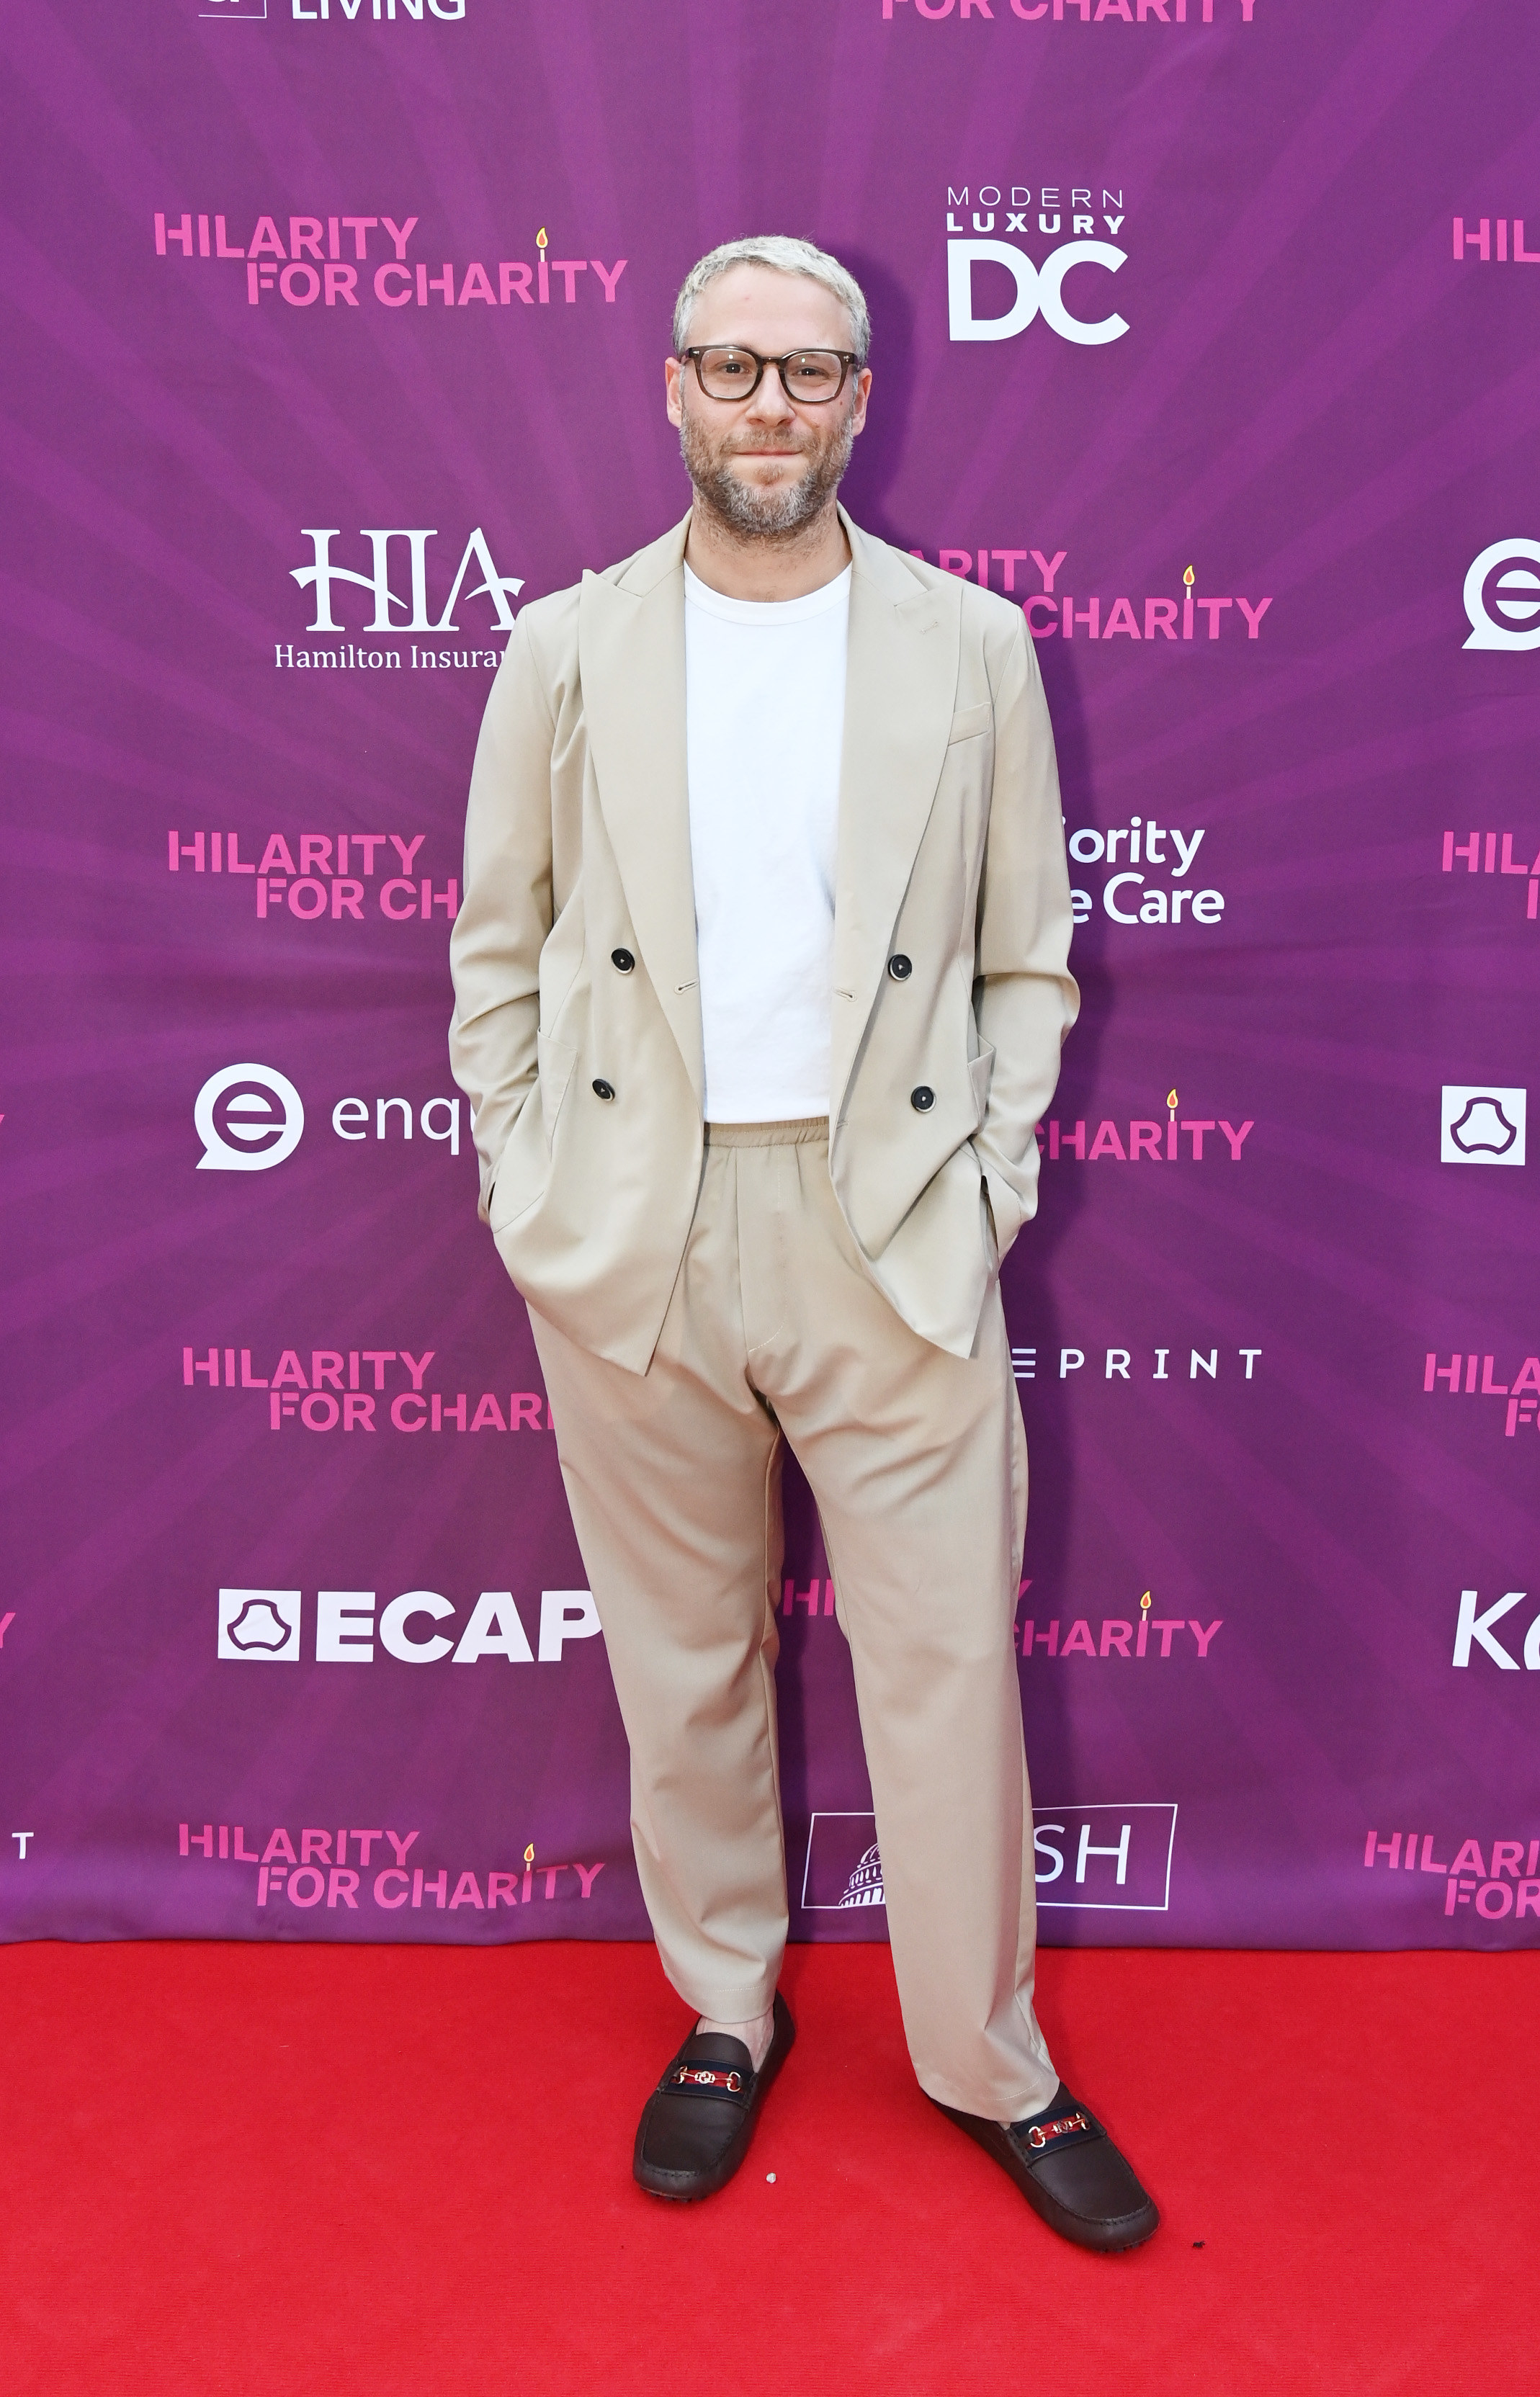 Set in a casual suit on the red carpet